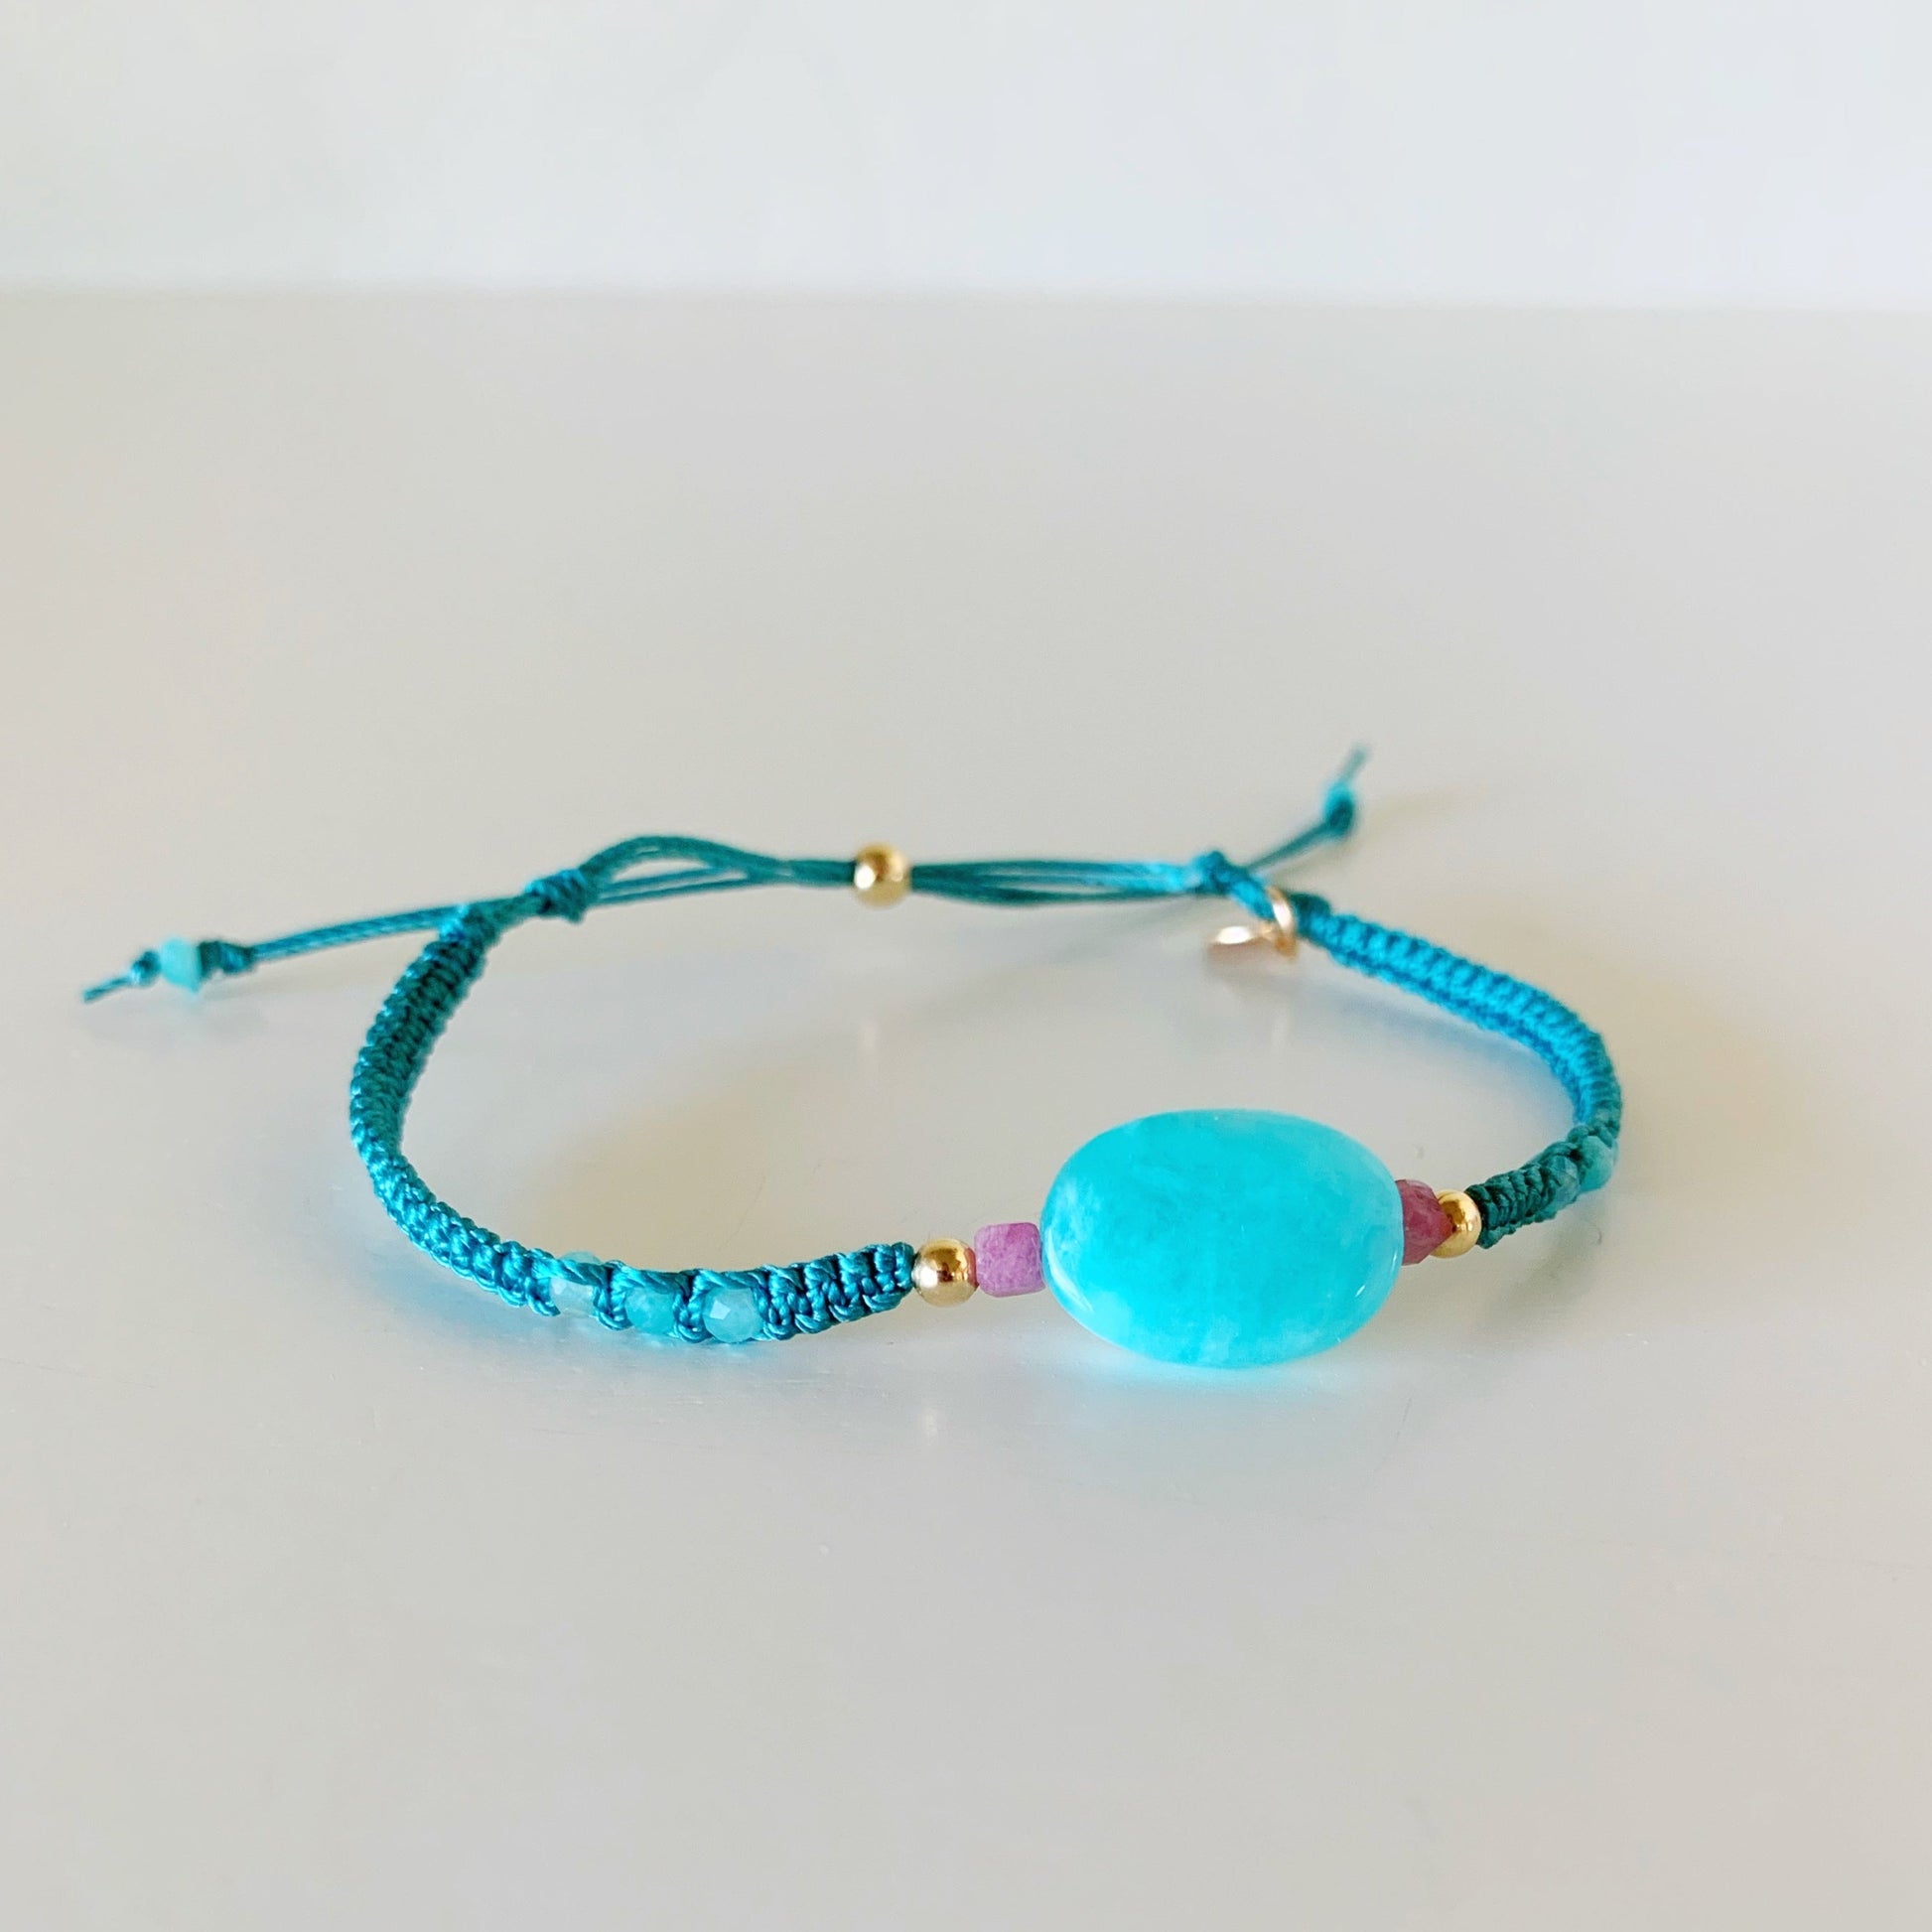 the harwich port adjustable macrame bracelet by mermaids and madeleines in color blue spruce is a friendship style bracelet with a slide bead clasp and a bright amazonite bead at the center with small amazonite rondelles on the side of the bracelet. this piece is complimented by pink tourmaline and 14k gold filled beads. this bracelet is facing to the right and photographed on a white surface